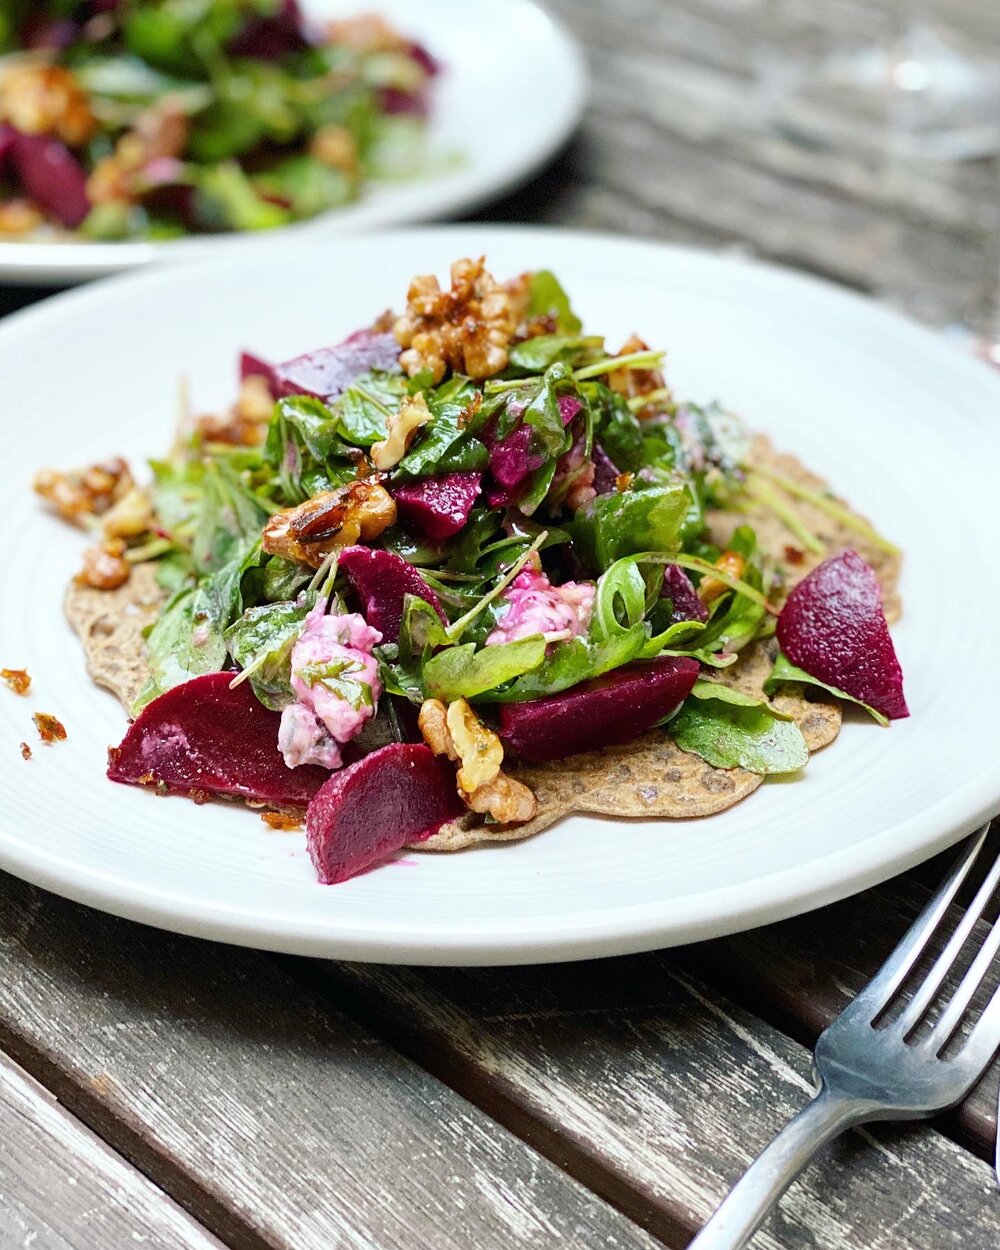 Buckwheat crepes with ricotta., beetroot and caramelised walnuts